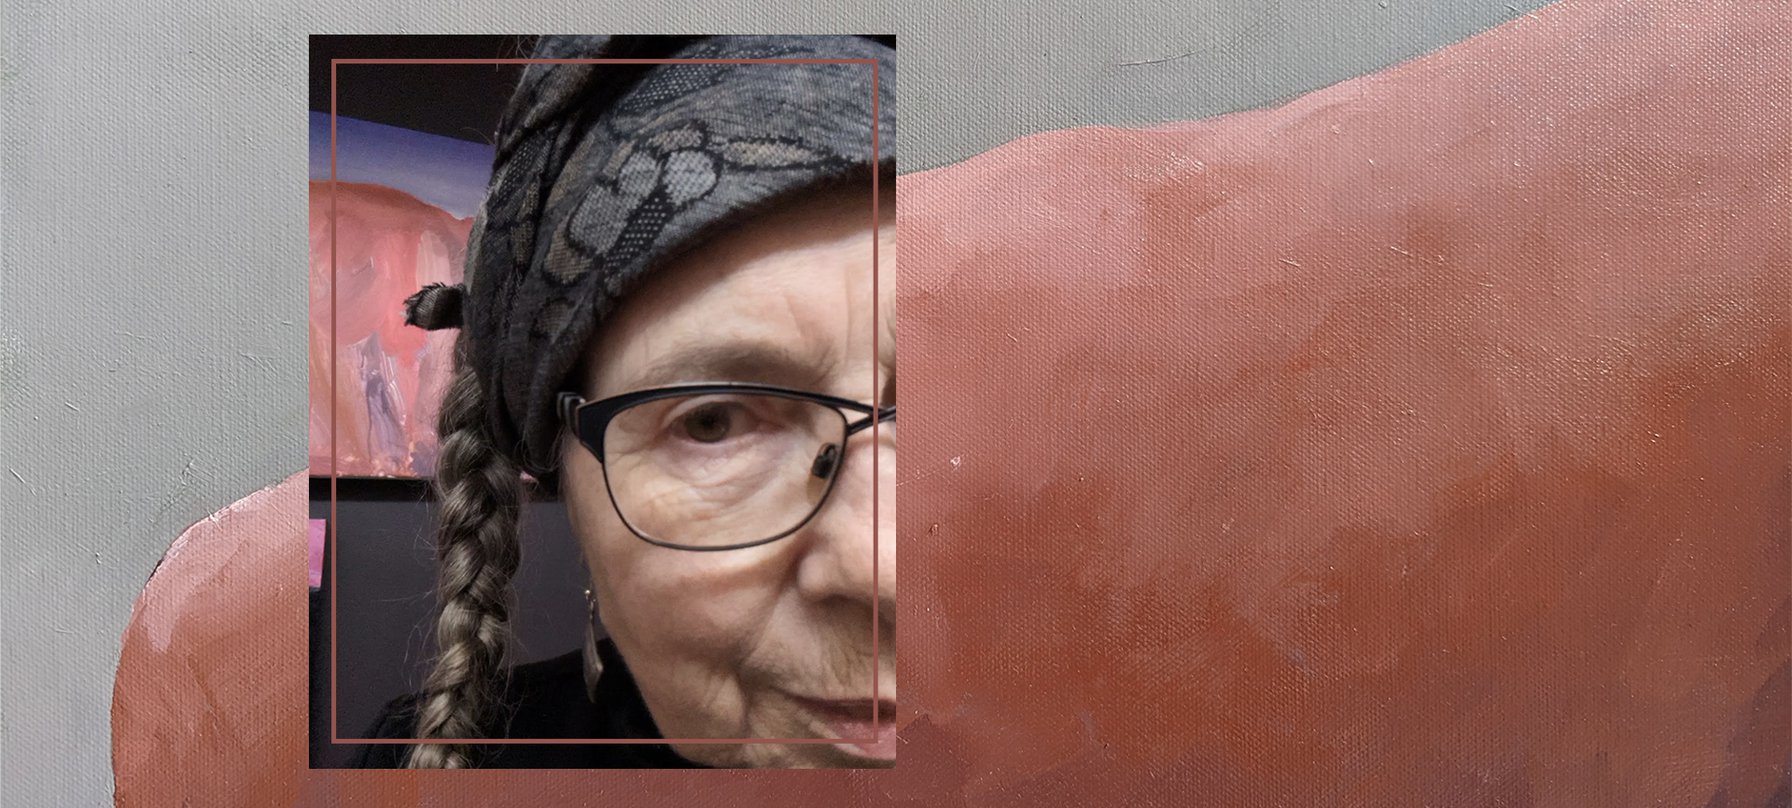 A photo of Julian Greer overlays a photo of her painting, as through she is looking through a window of her work. Half of Julian's face looks out. She smiles. Julian's work uses earthy reds and shadowing to create a rock shape that feels 3D. No credit.